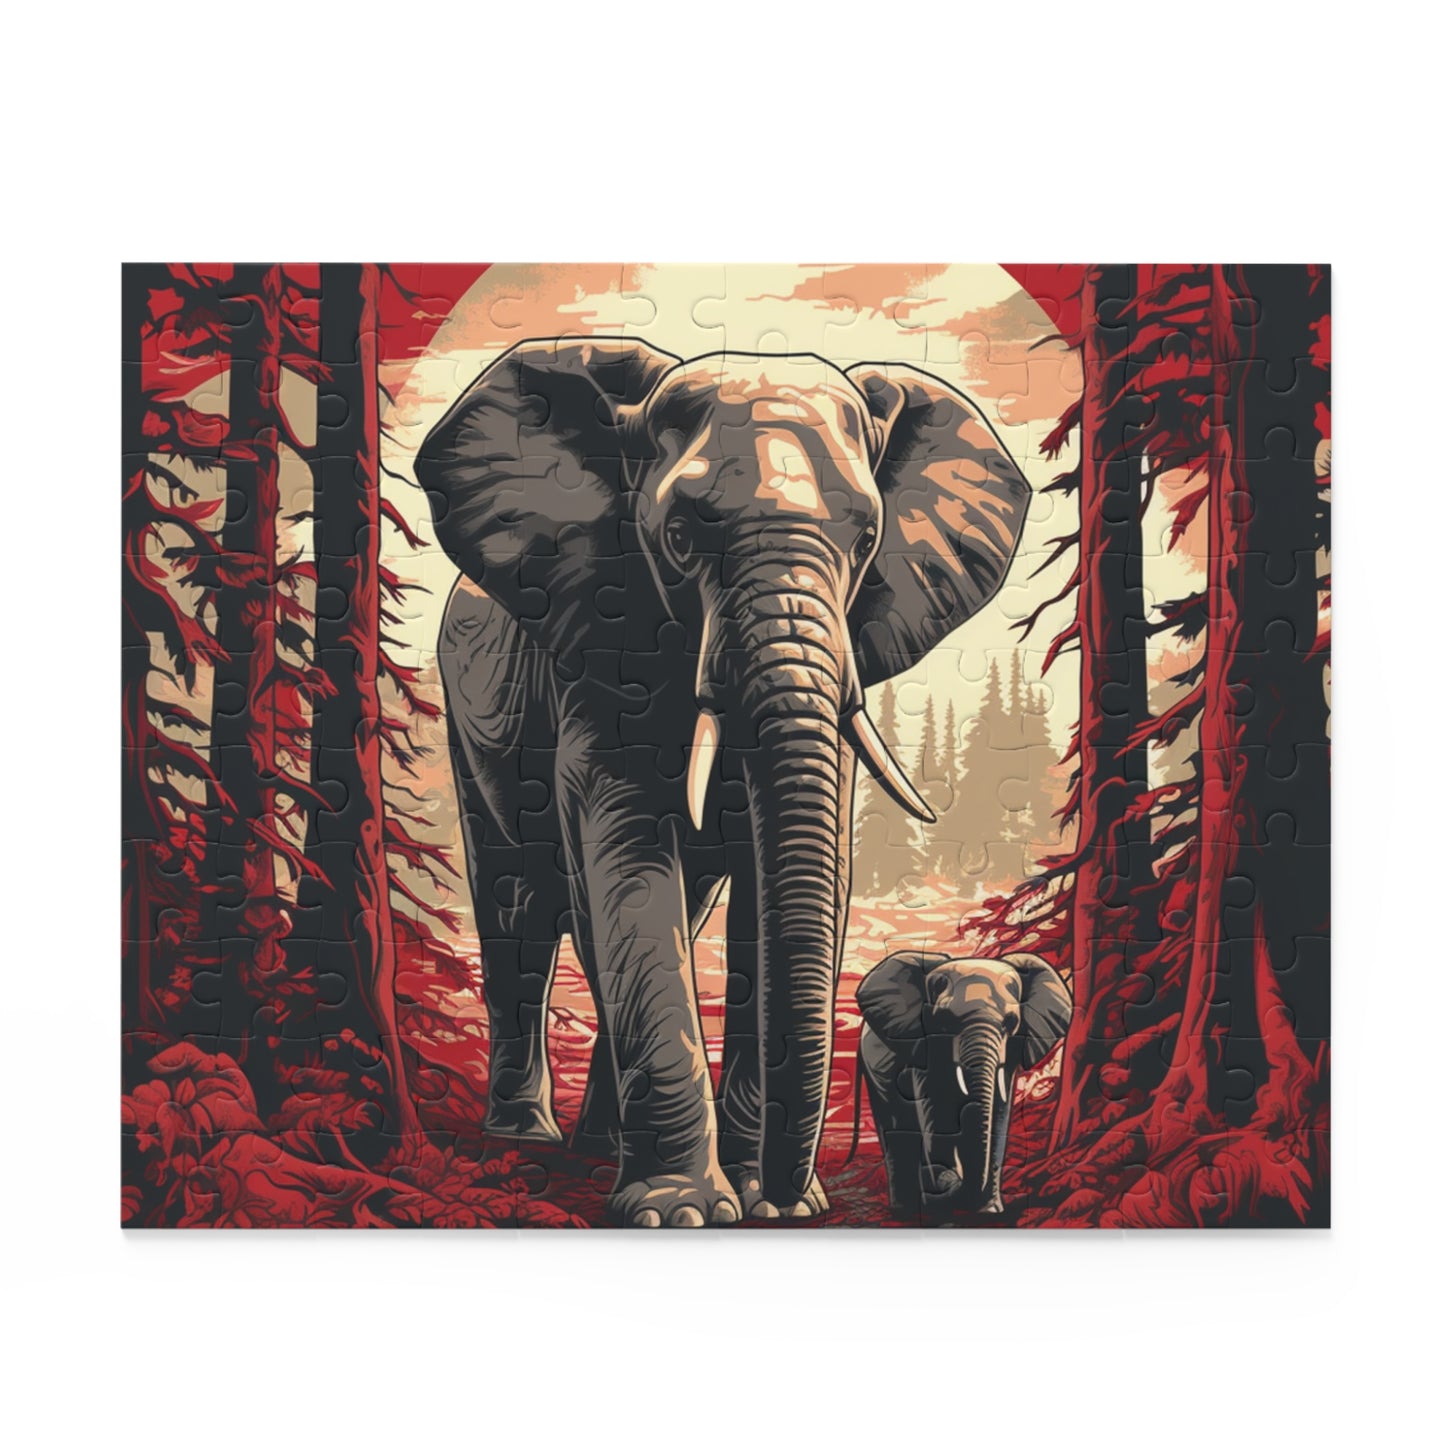 Vibrant Abstract Elephant Jigsaw Puzzle for Boys, Girls, Kids Adult Birthday Business Jigsaw Puzzle Gift for Him Funny Humorous Indoor Outdoor Game Gift For Her Online-2